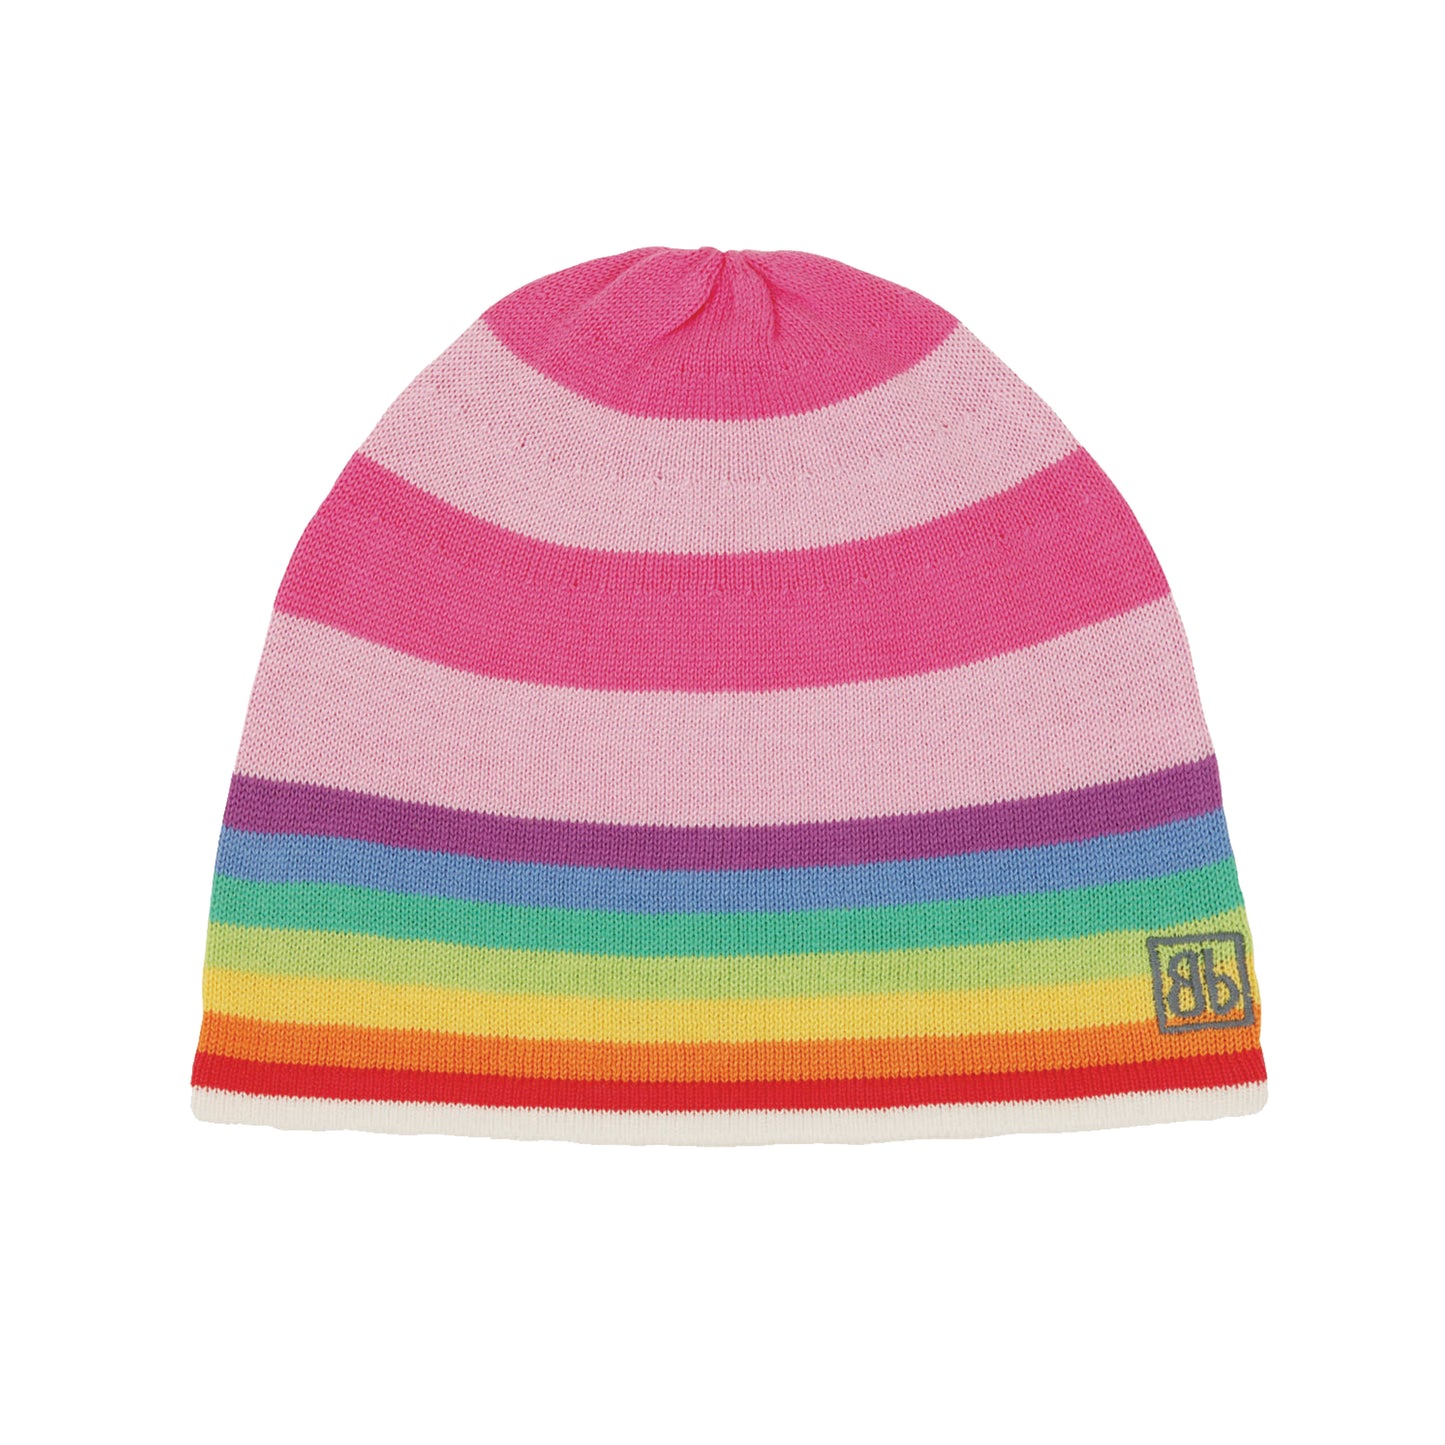 HAT - ONE SIZE - 2 COLOR (BLUE/PINK) - BB022